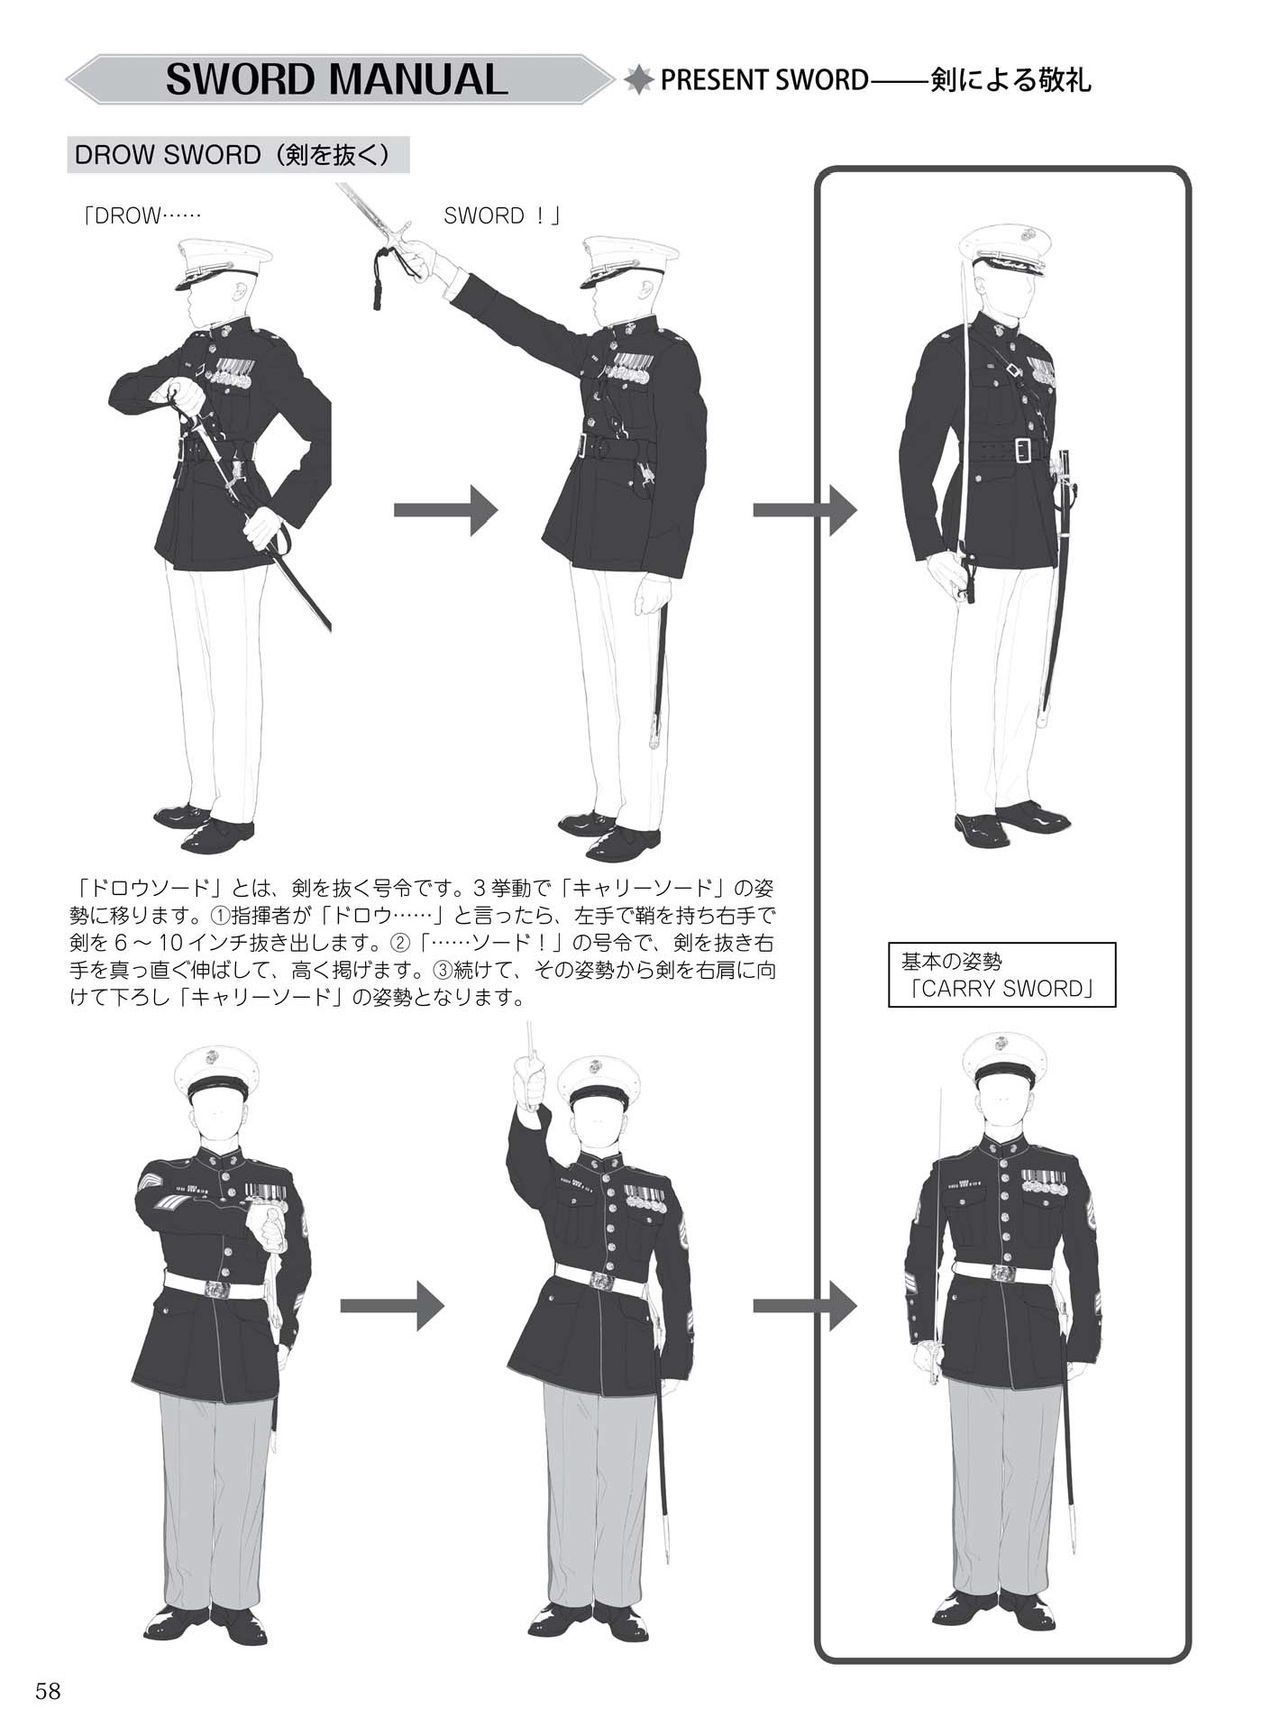 How to draw military uniforms and uniforms From Self-Defense Forces 軍服・制服の描き方 アメリカ軍・自衛隊の制服から戦闘服まで 61